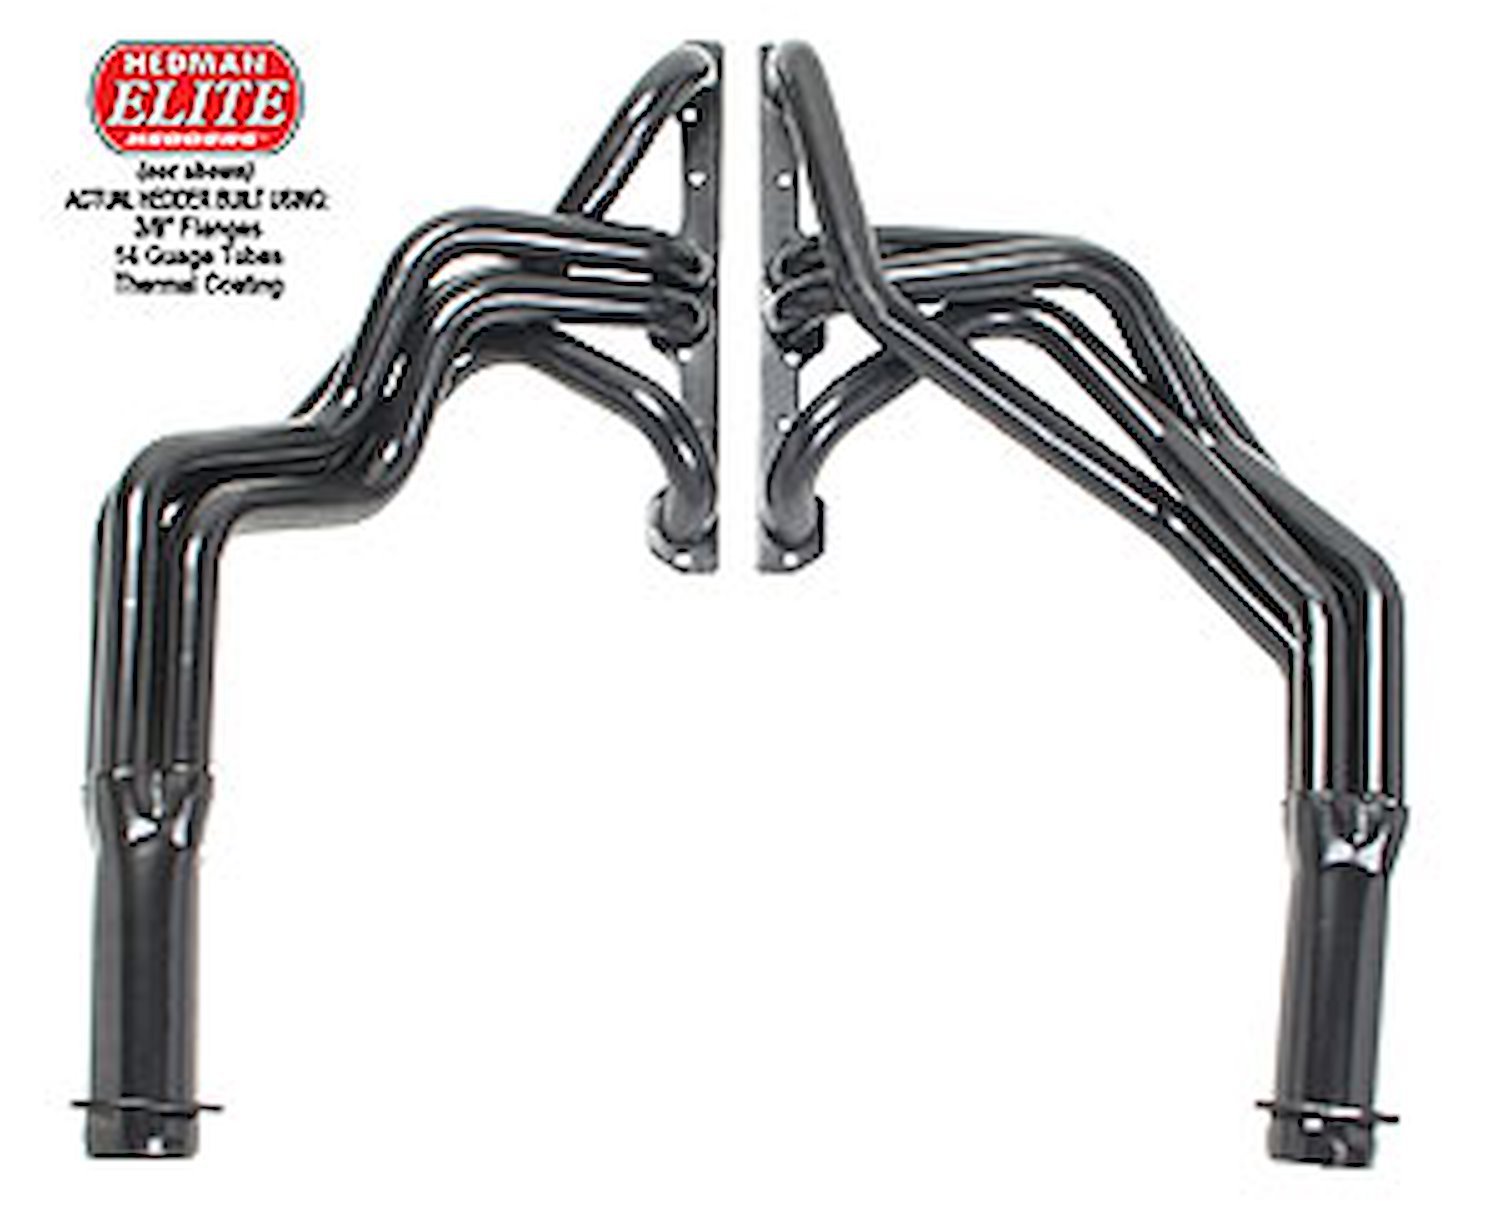 Elite Ultra-Duty HTC Coated Full Length Headers 1955-57 Chevy Bel Air/One-Fifty/Two-Ten 283-400